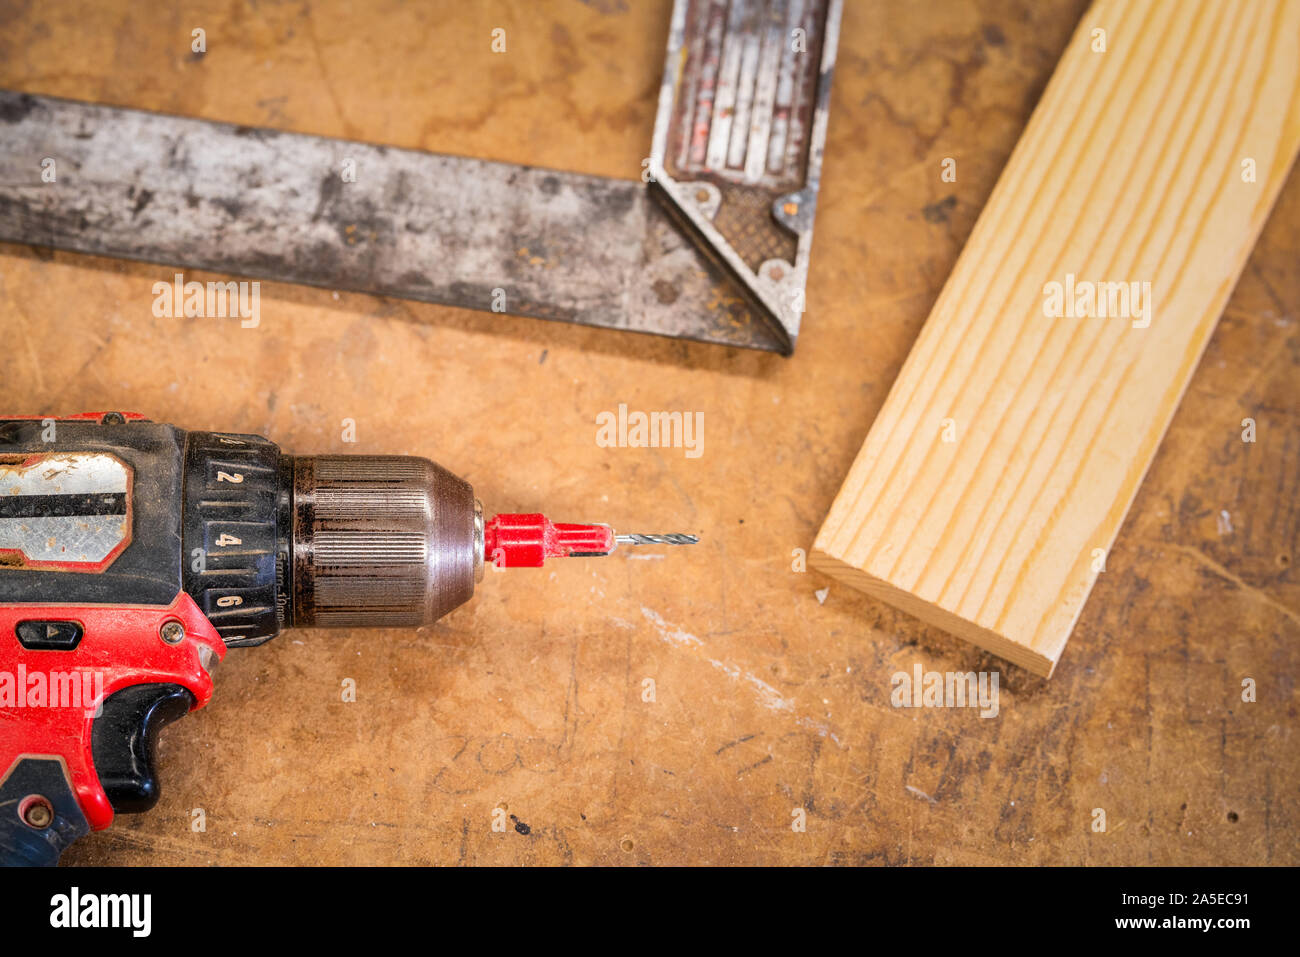 Carpentry equipment's for pruducing or fixing furniture in workshop. Stock Photo